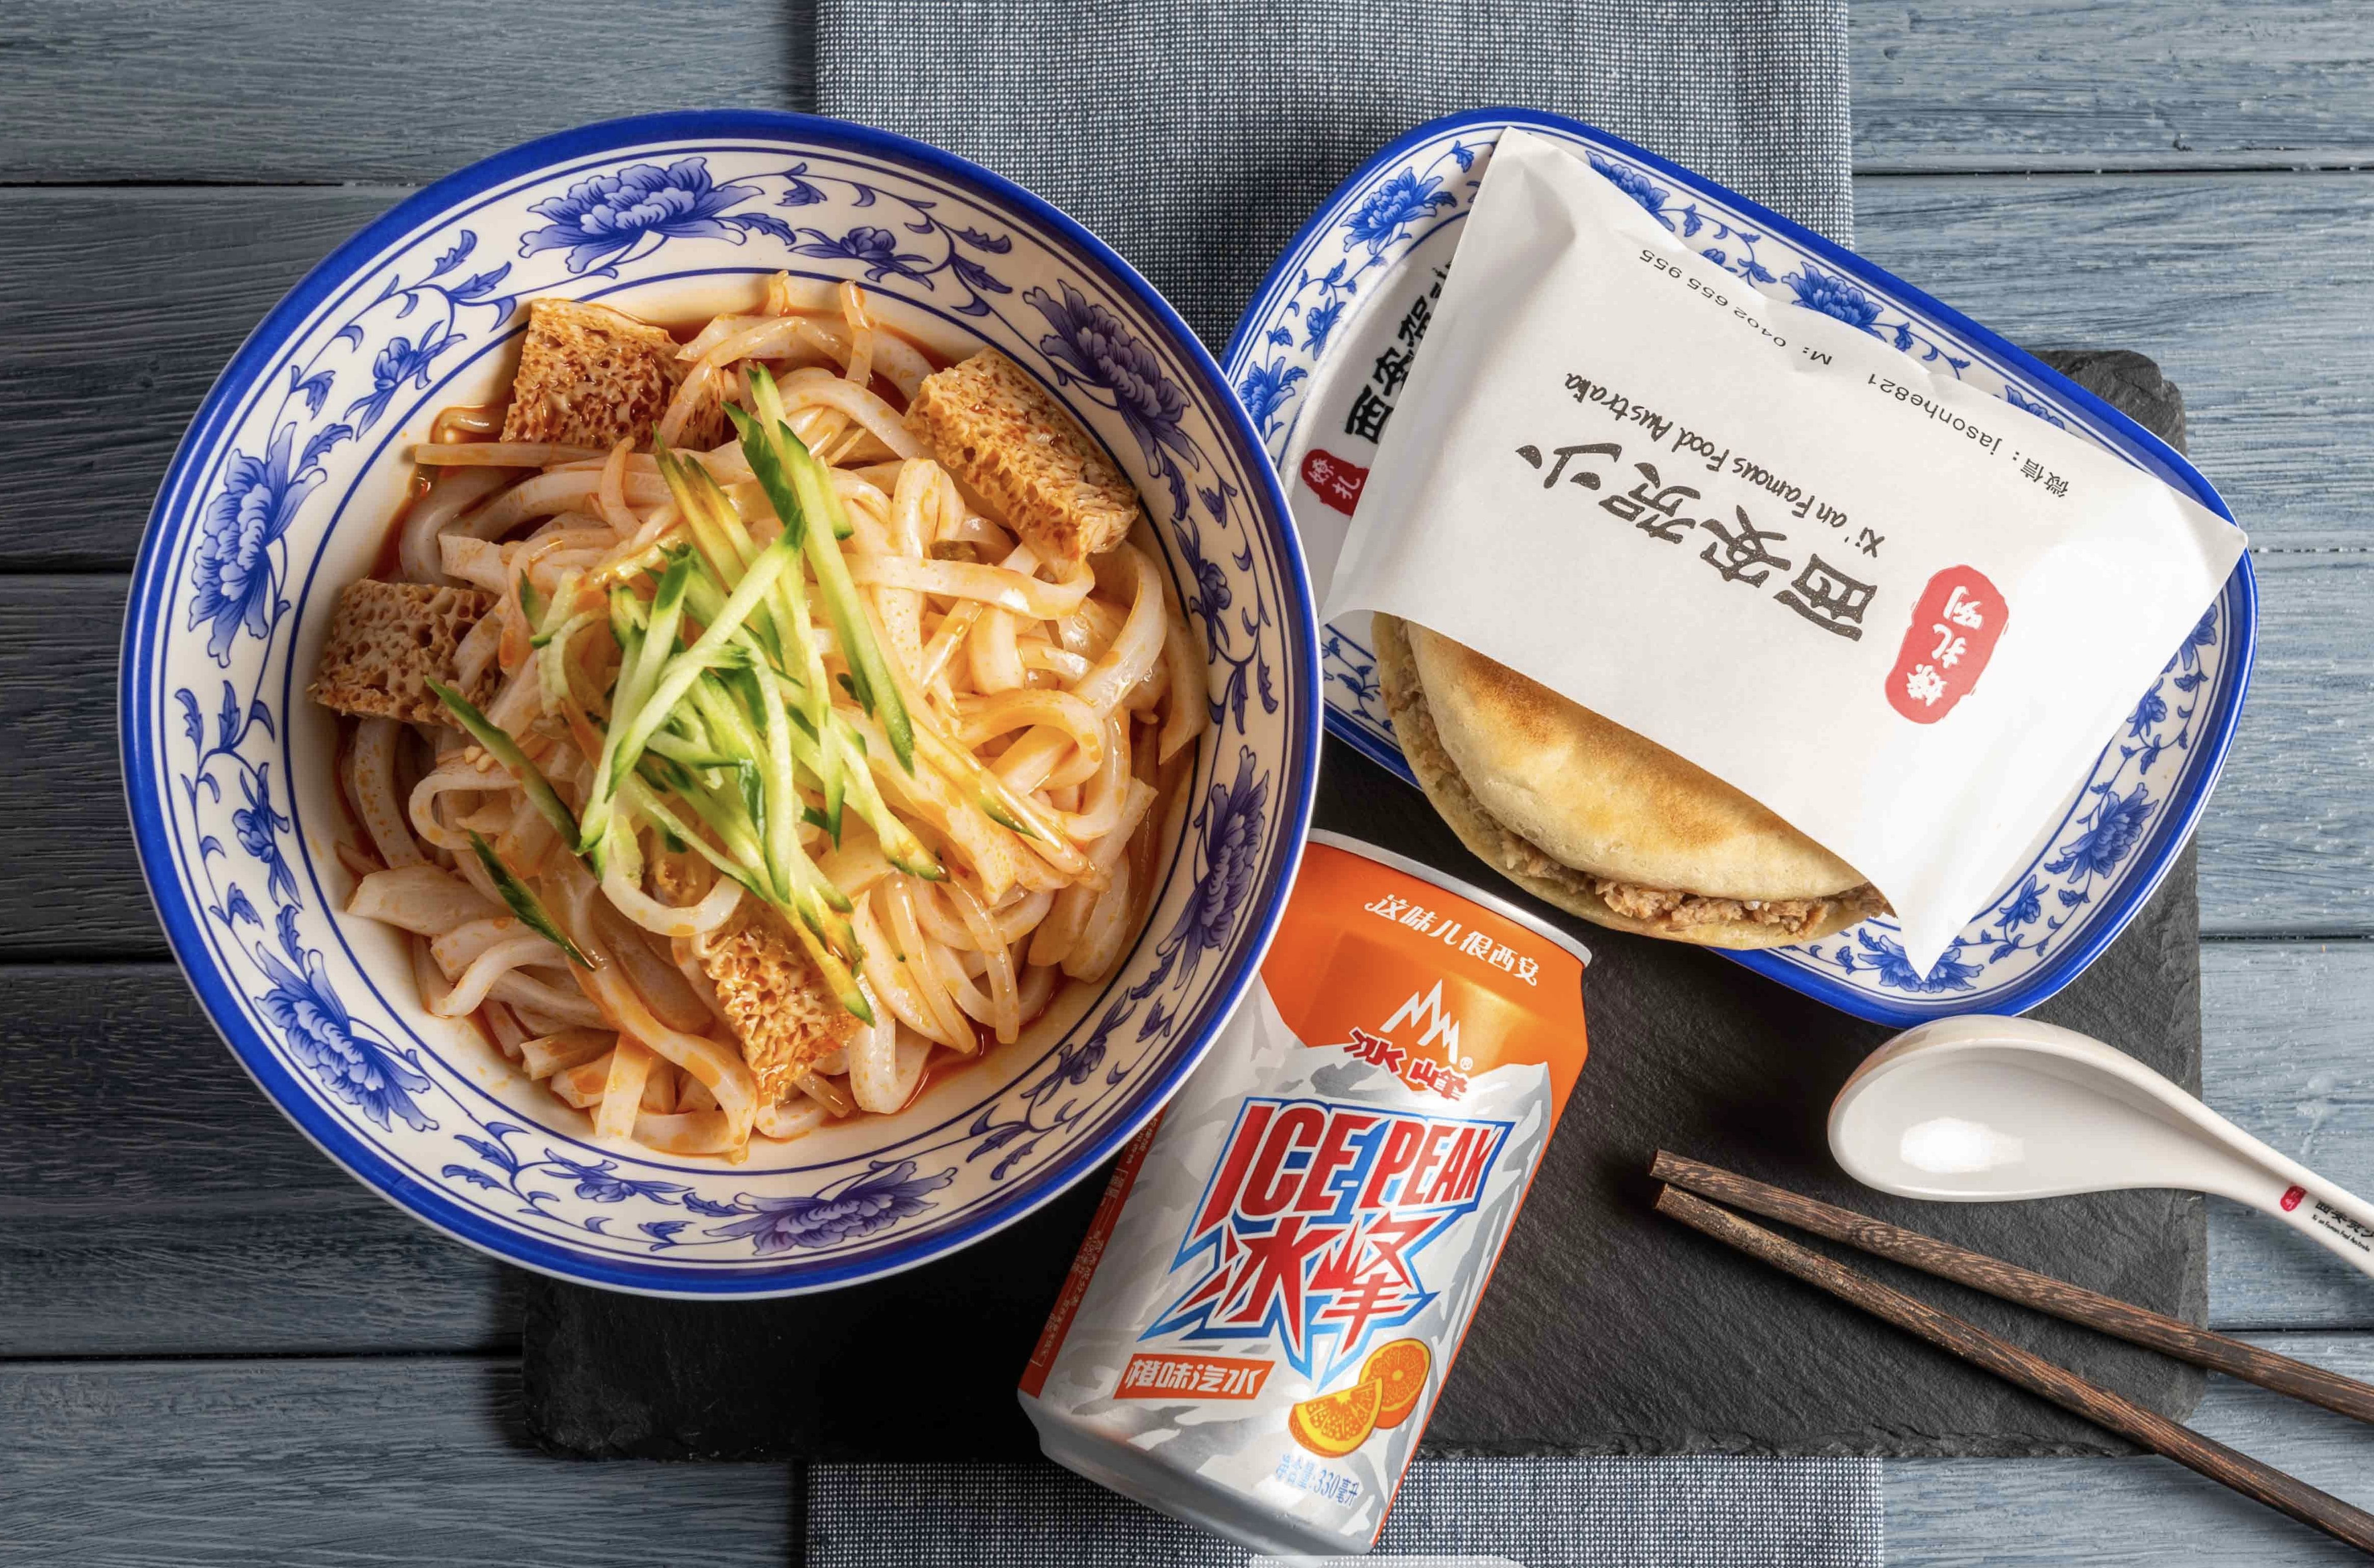 Xian Cold Skin Noodles, Pork Burger and soft drink (375ml) combo